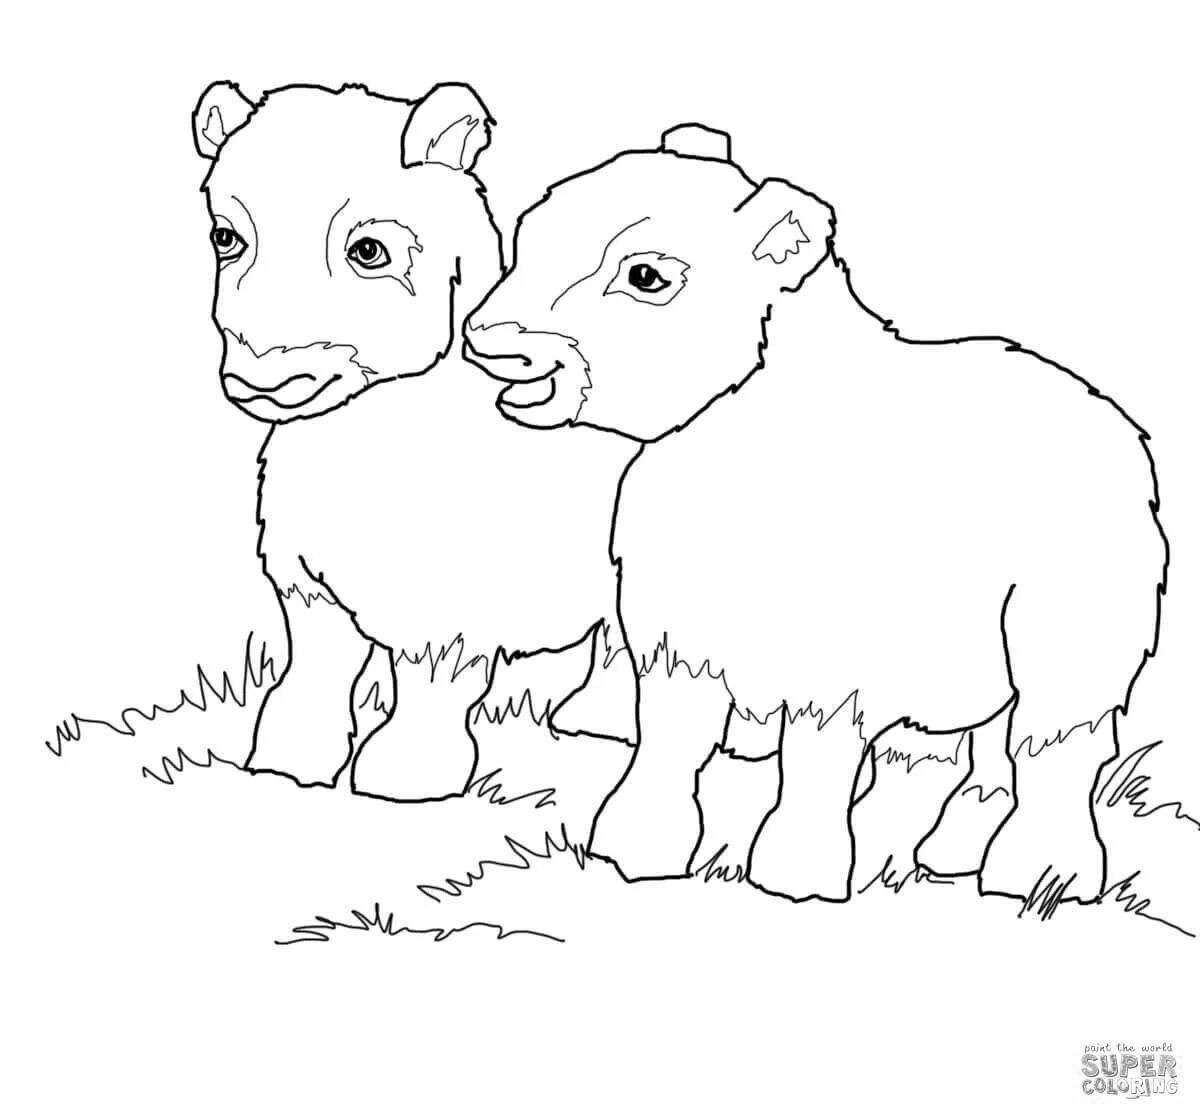 Fascinating musk ox coloring book for kids